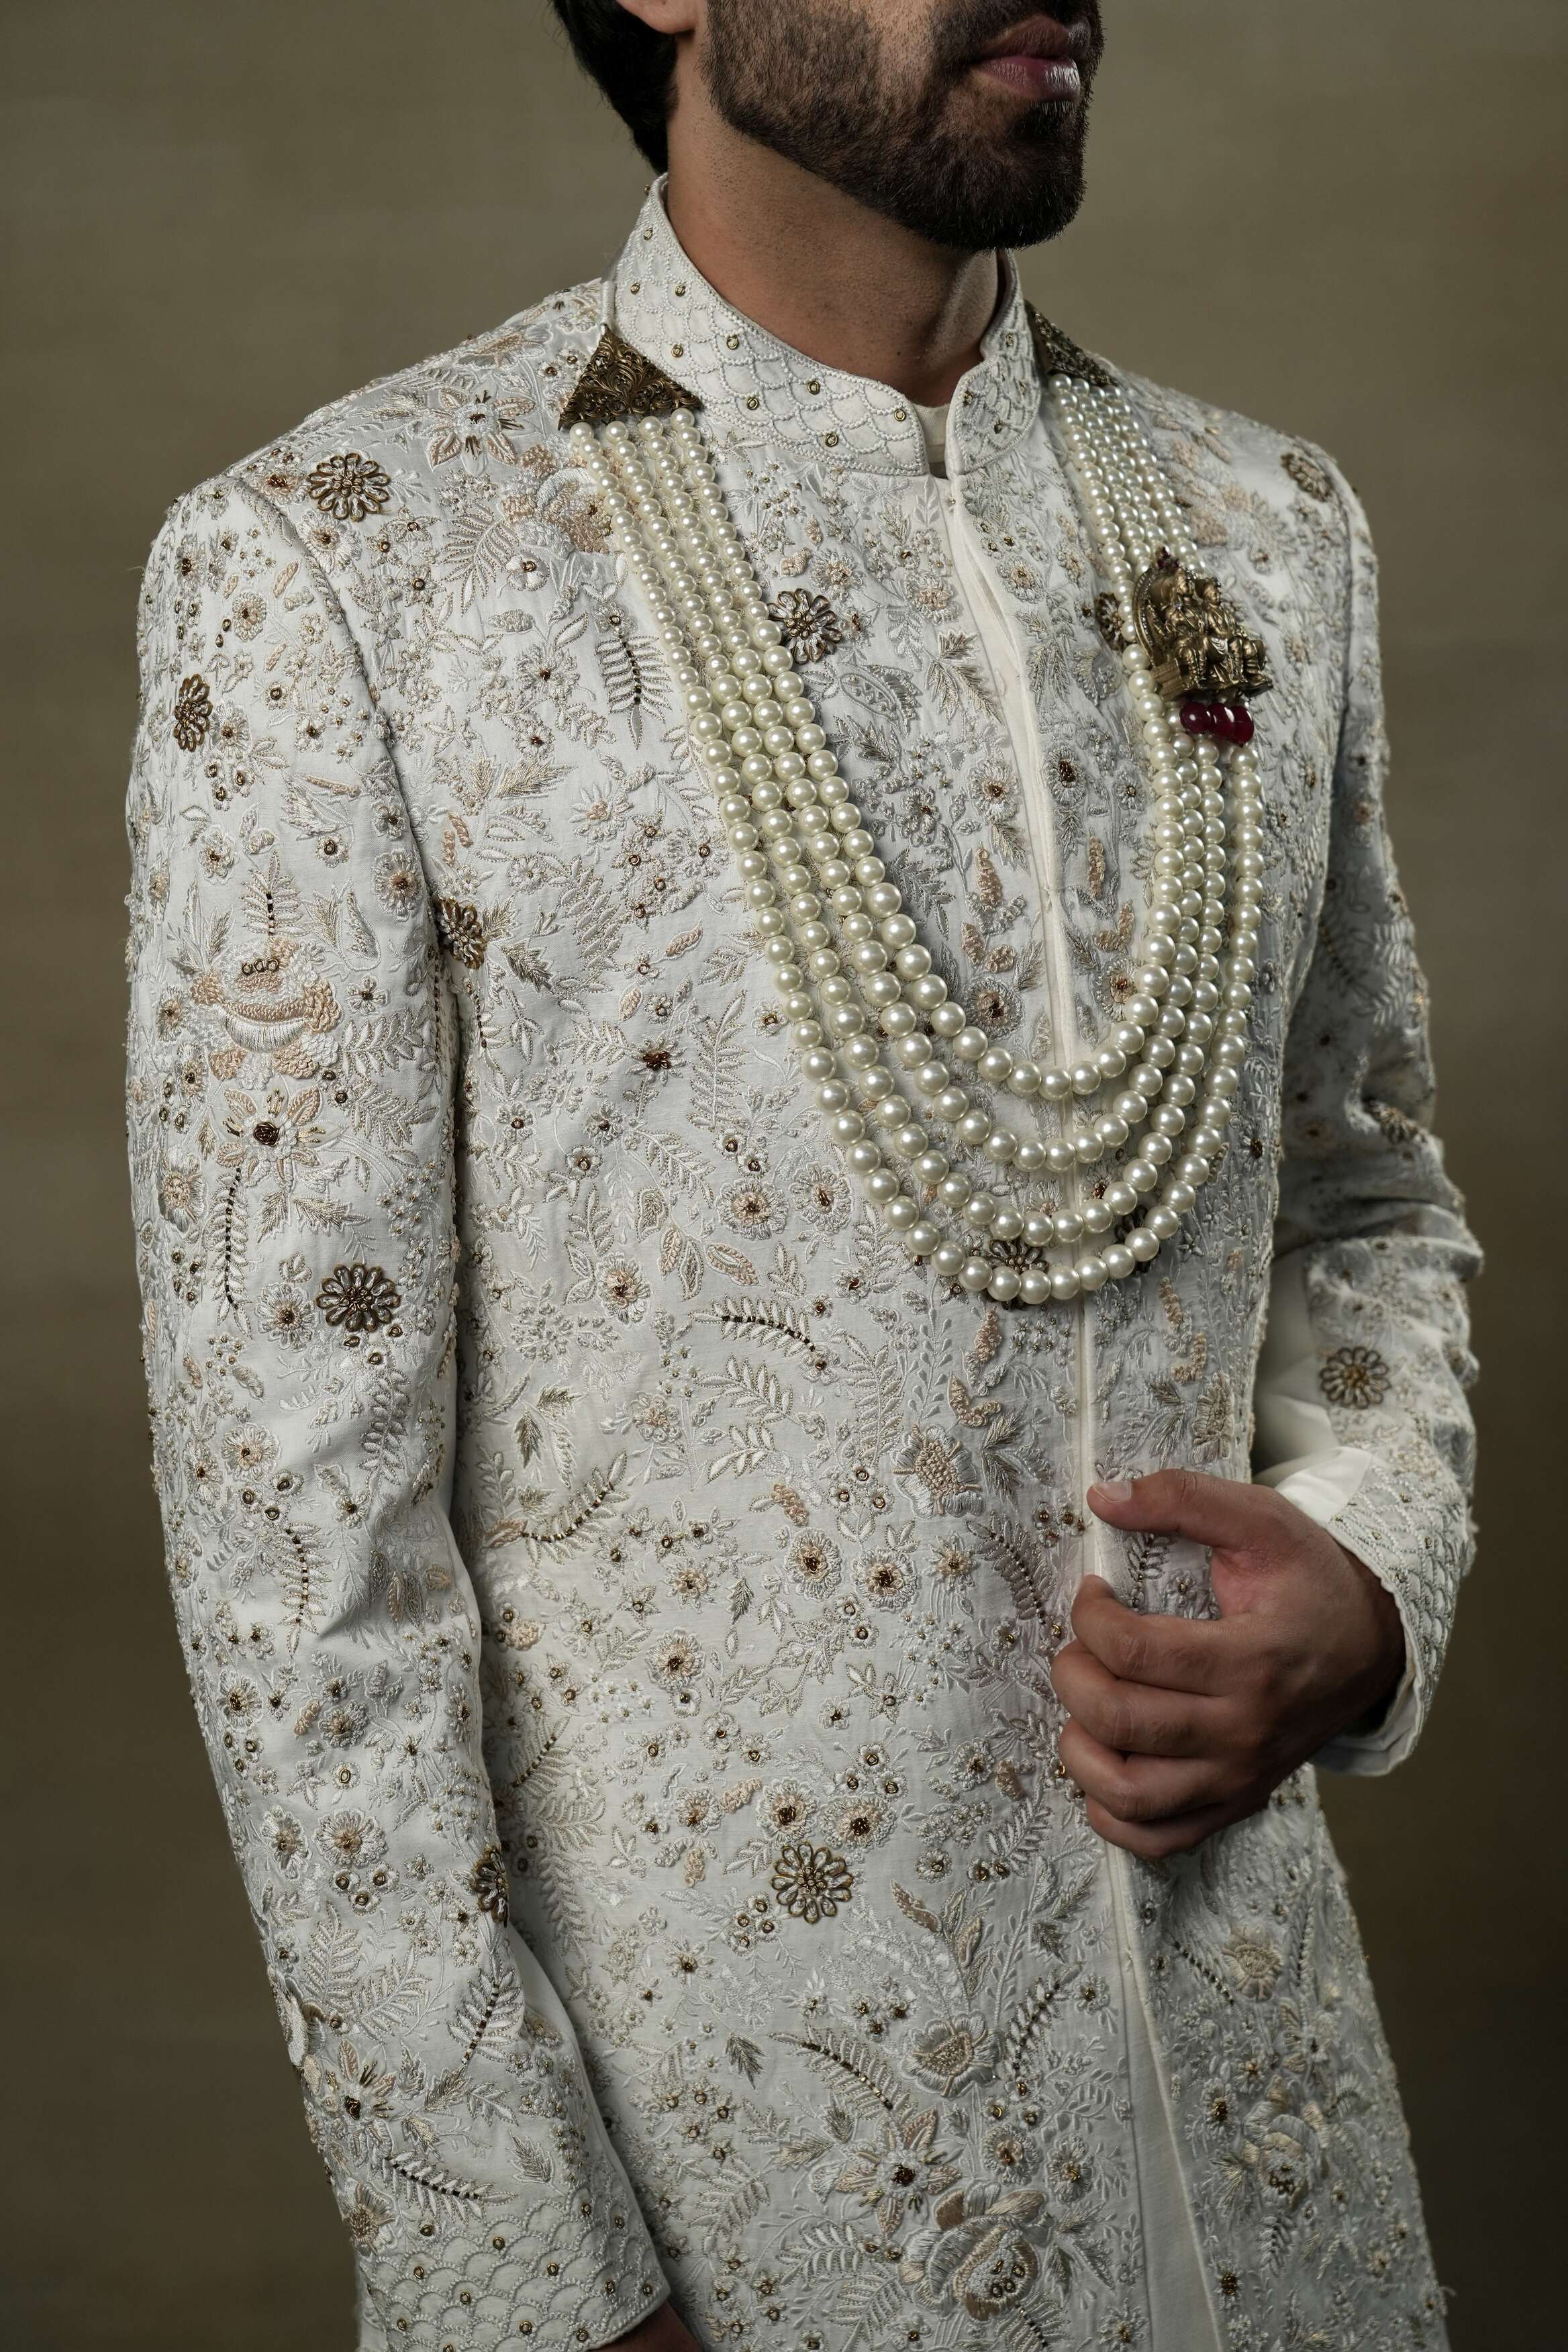 Close-up of the Ivory & Gold Sherwani, revealing intricate gold embroidery and fine detailing.